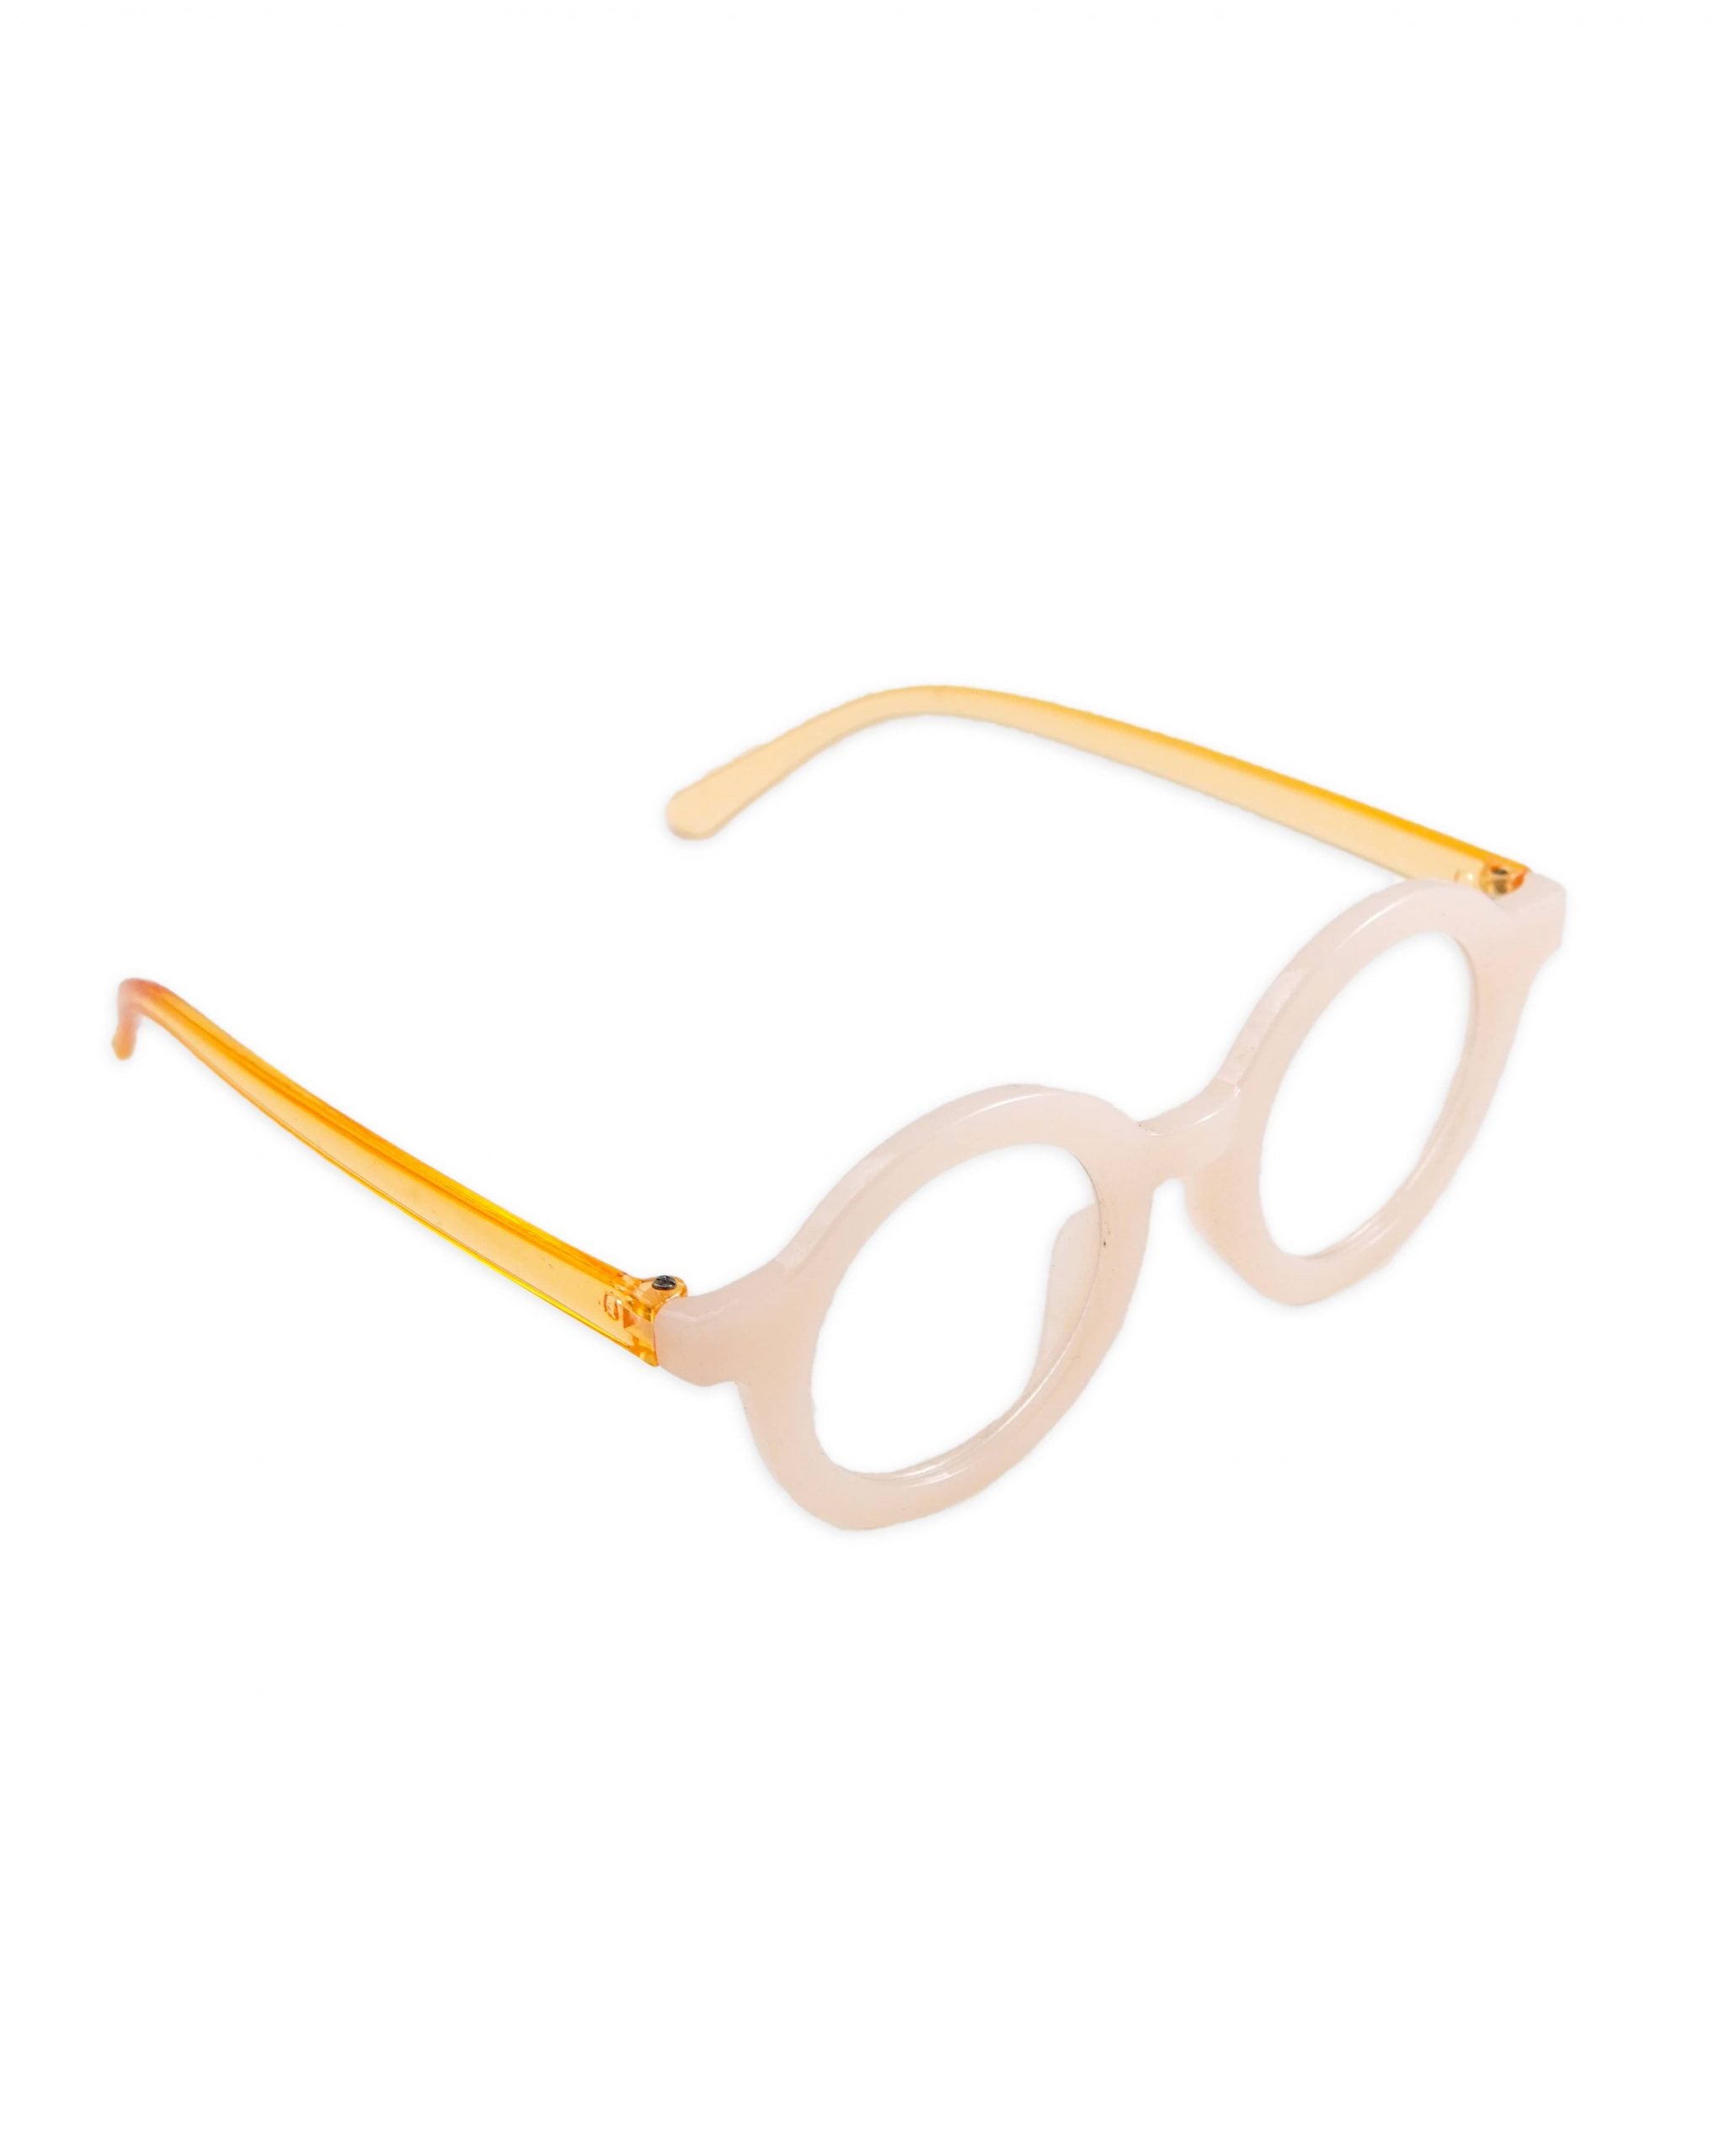 YELLOW AND PINK GLASSES